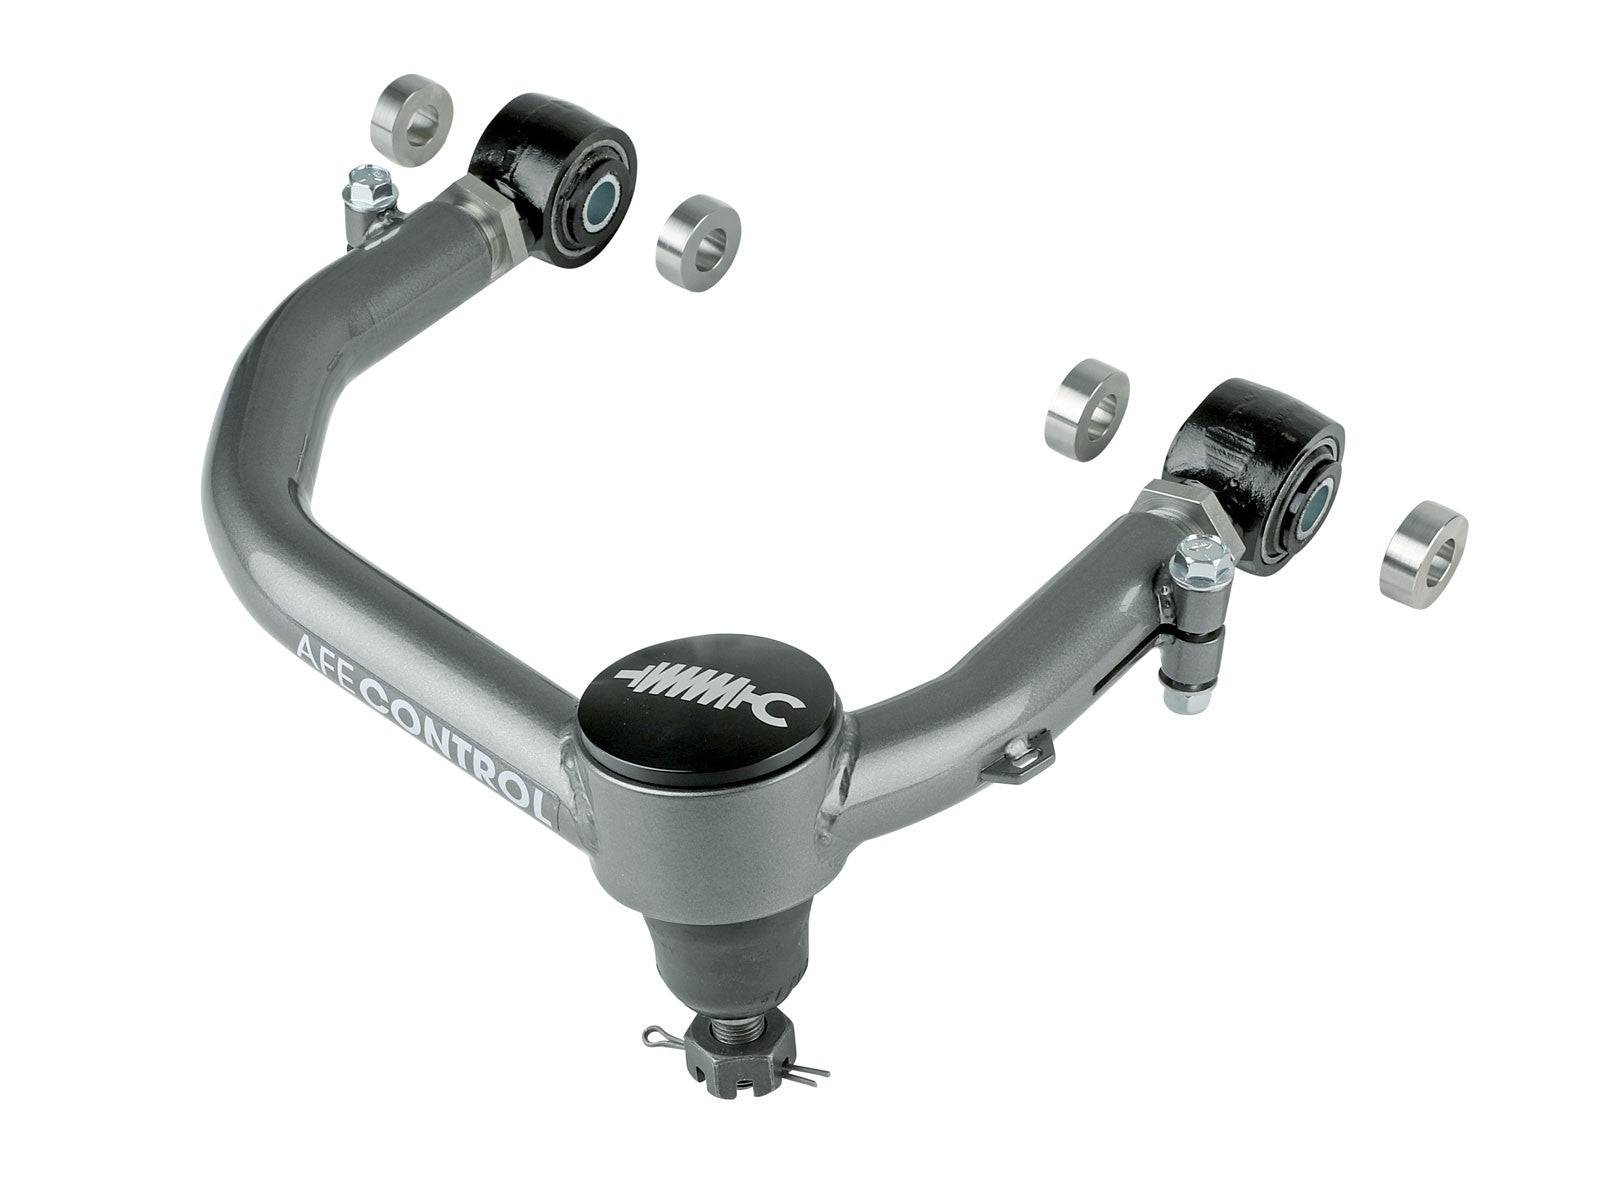 aFe Control Upper Control Arms | 2005-2021 Toyota Tacoma (afe460